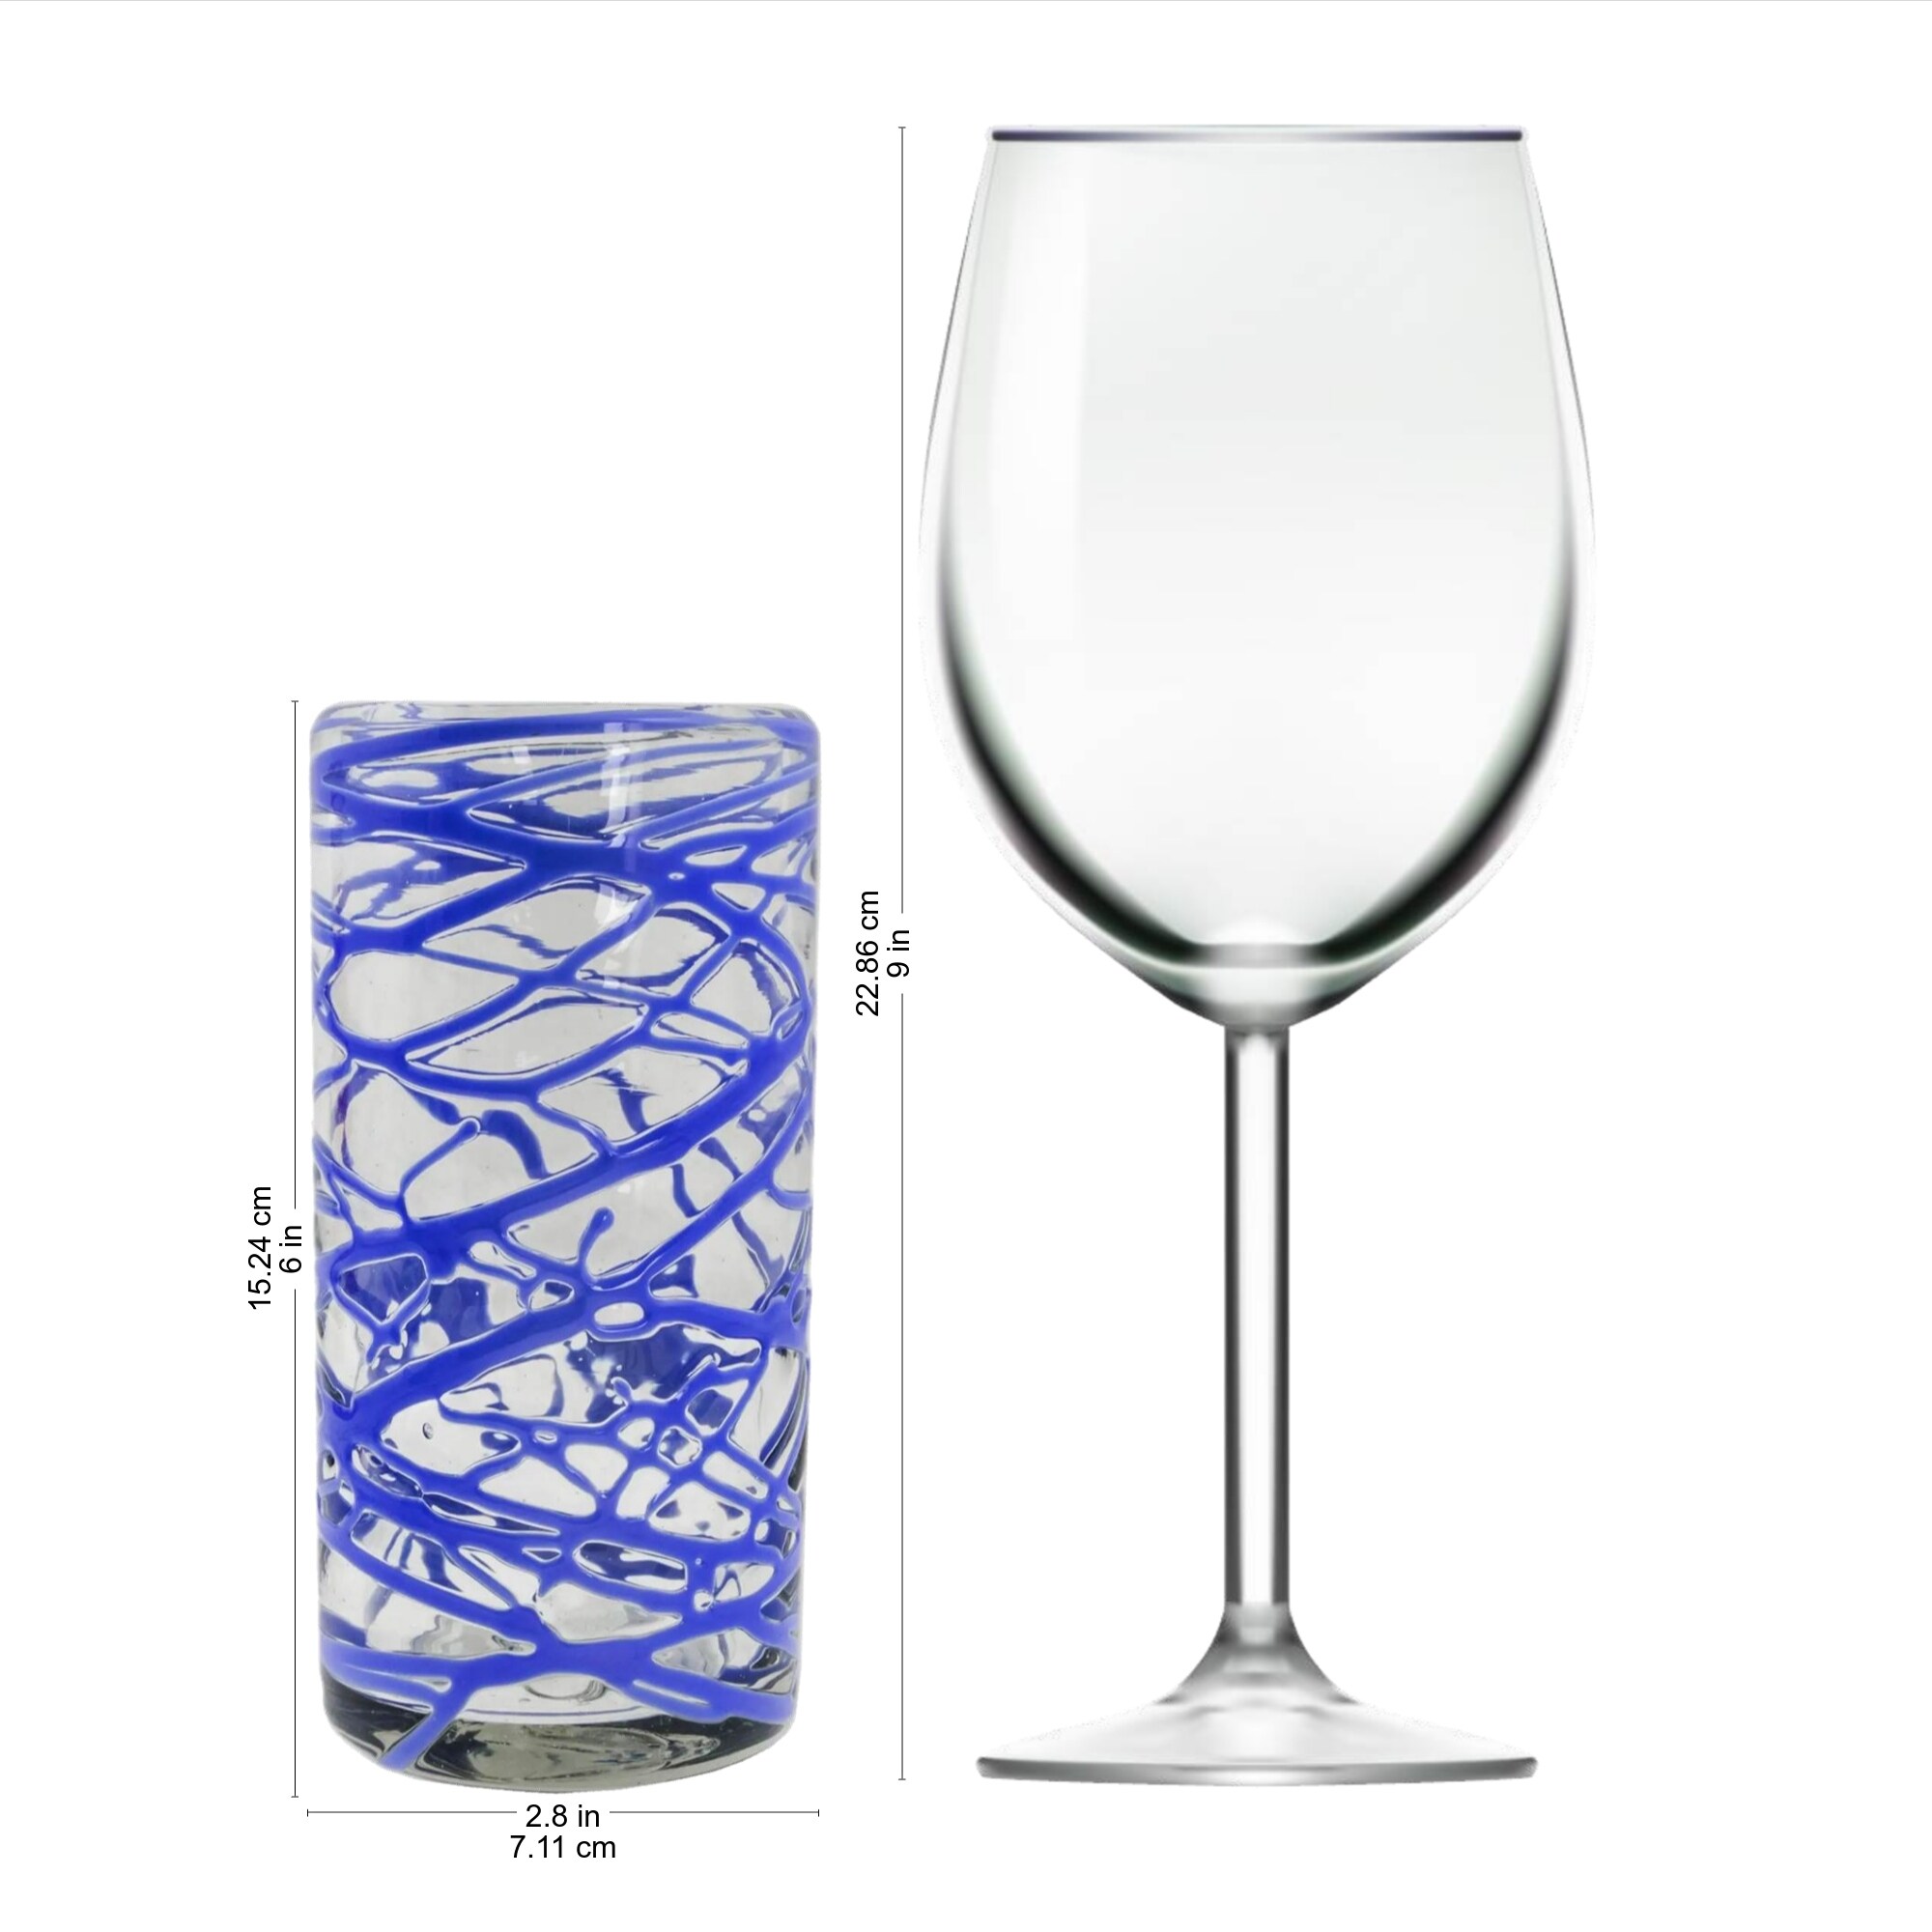 https://ak1.ostkcdn.com/images/products/is/images/direct/1a4a95ac0edcf8c396179a0cd03d443652aad06f/NOVICA-Handmade-Blown-Glass-High-Ball-Glasses-Sapphire-Swirl-Set-of-6-%28Mexico%29.jpg